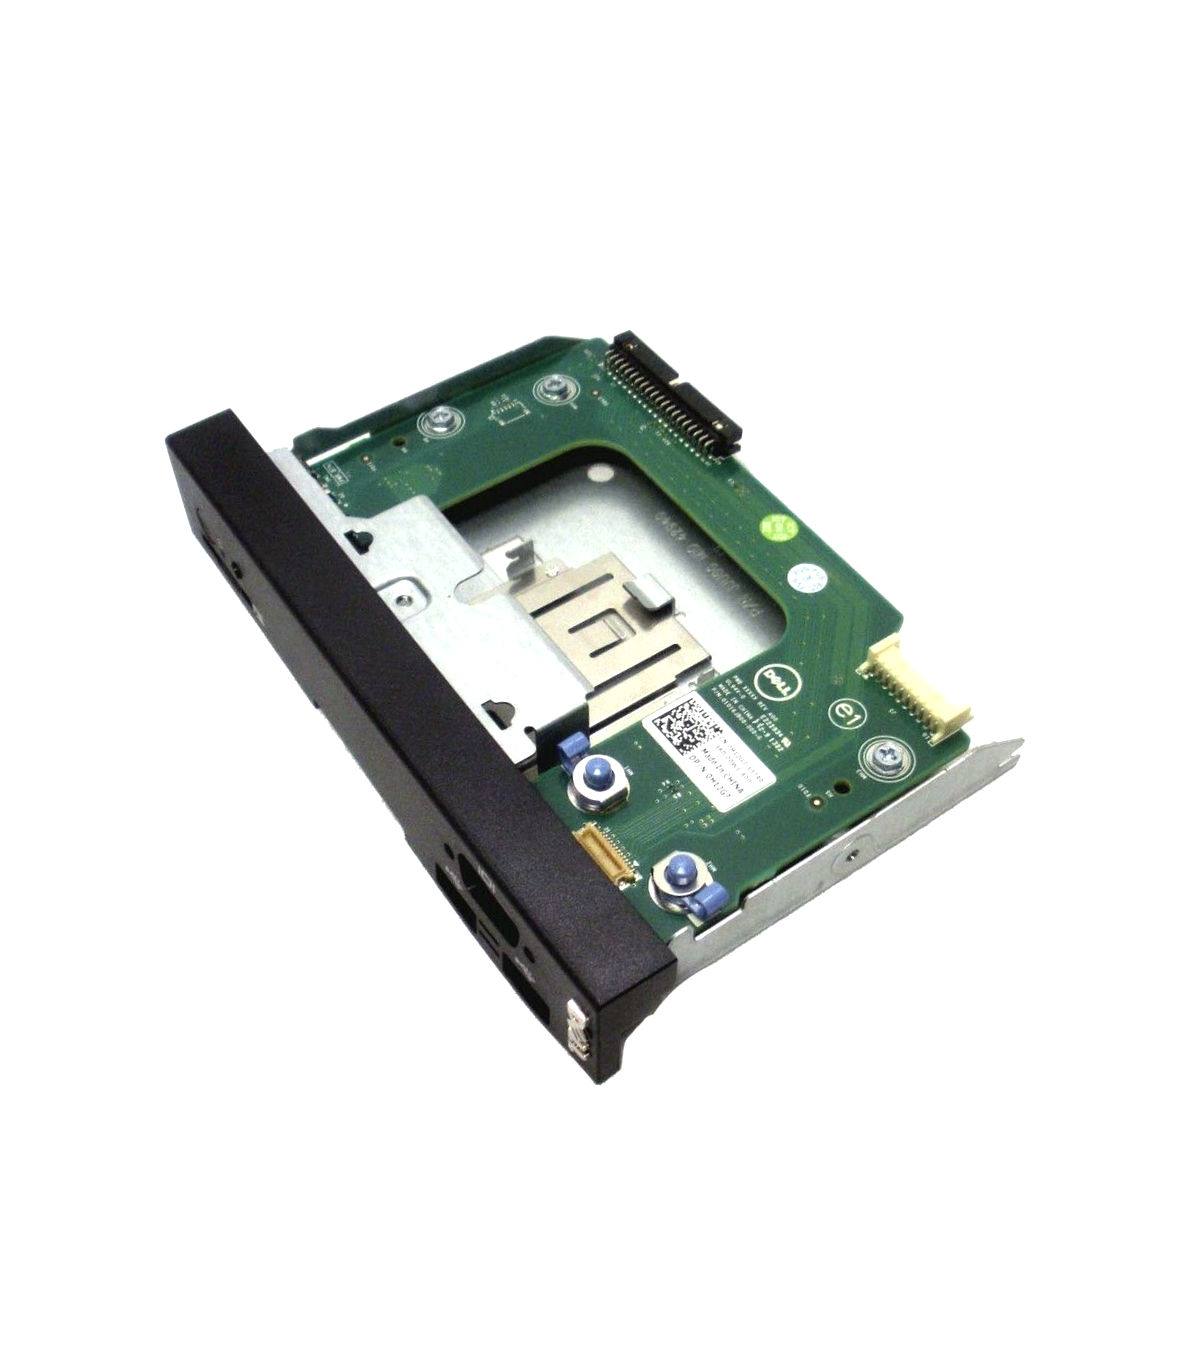 DELL T620 FRONT CONTROL LCD PANEL BOARD 0H12G7